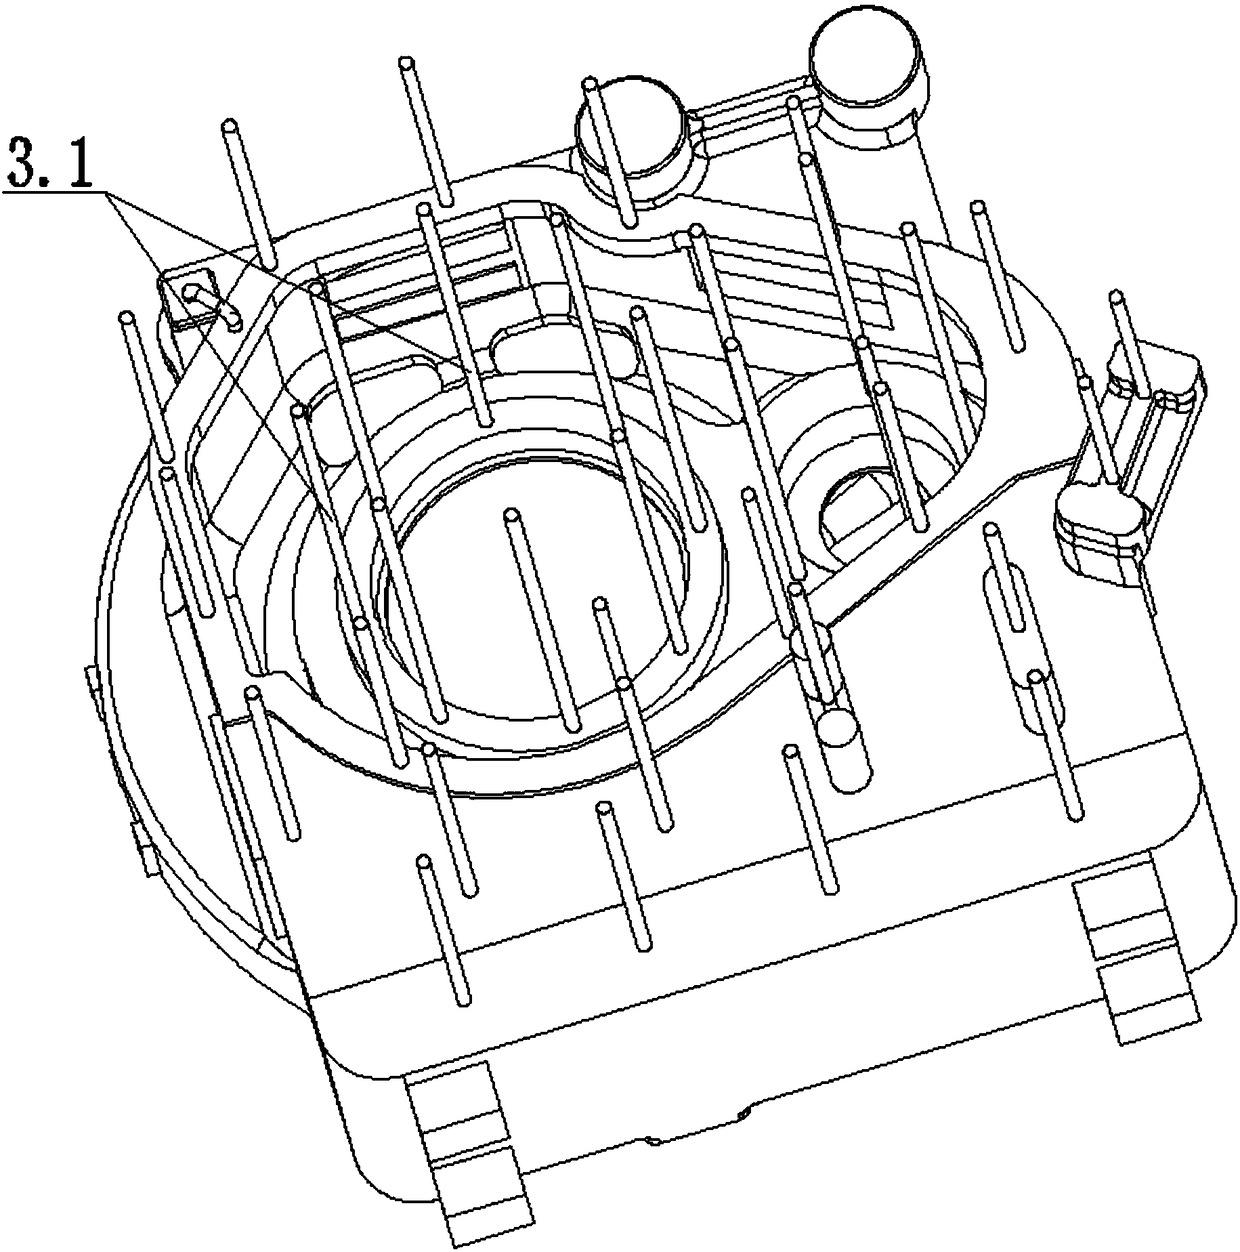 Cavity structure and method of wind turbine rear box casting